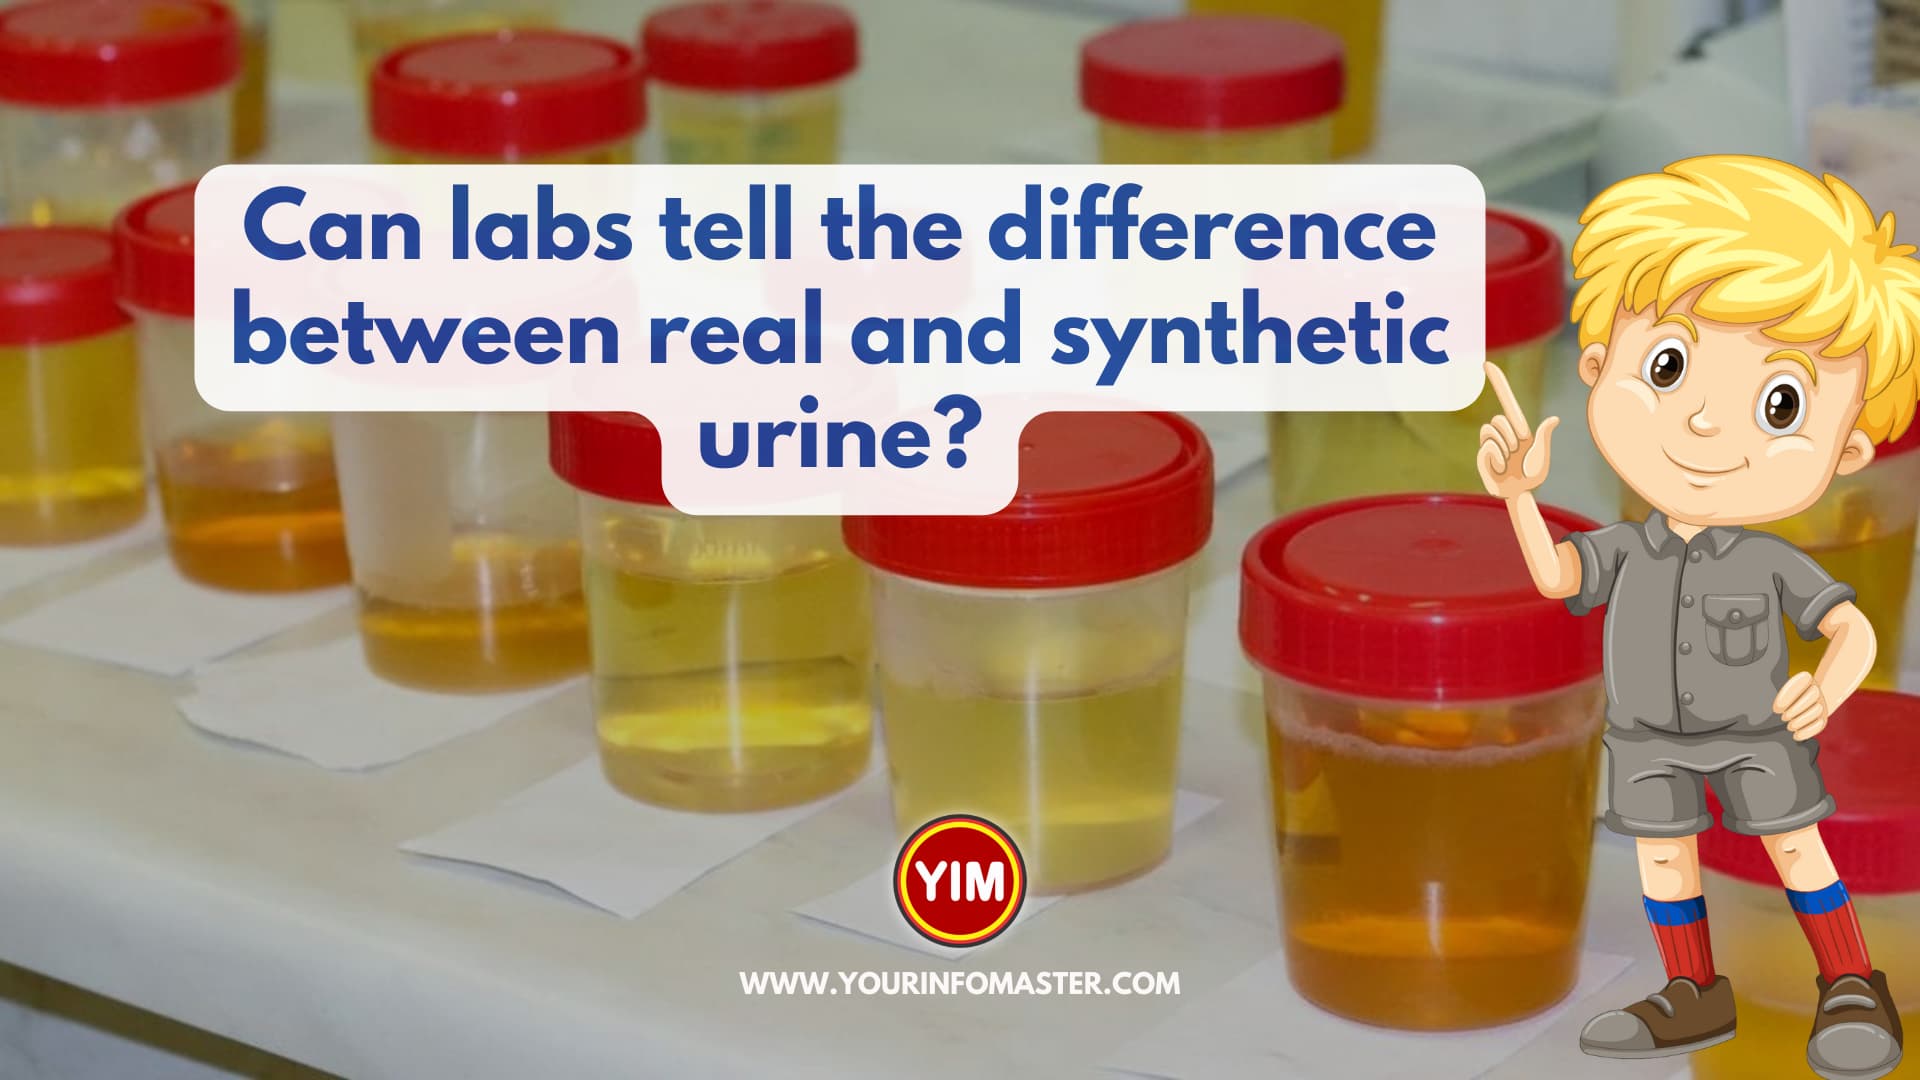 I am going to explain the blog post "Can labs tell the difference between real and synthetic urine?"